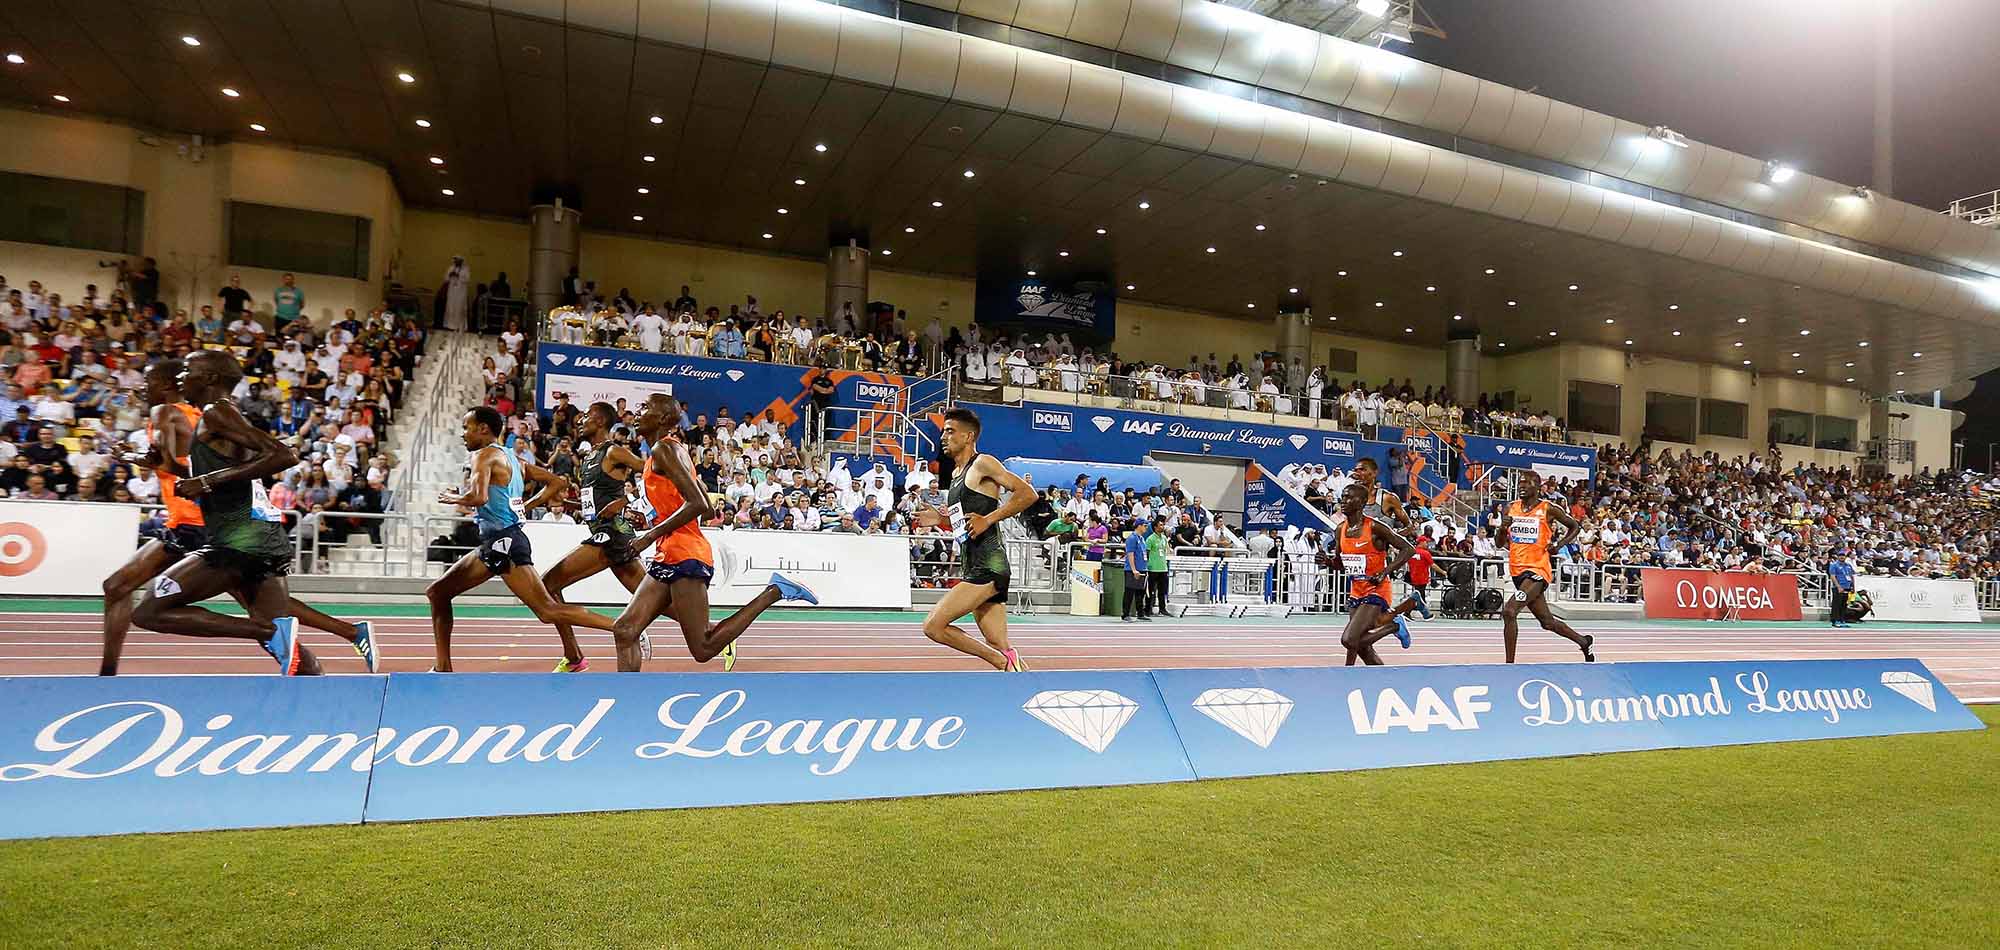 Star-studded lineup look to end their season in Doha on a high as the Season Finale of the 2020 Wanda Diamond League begins Friday